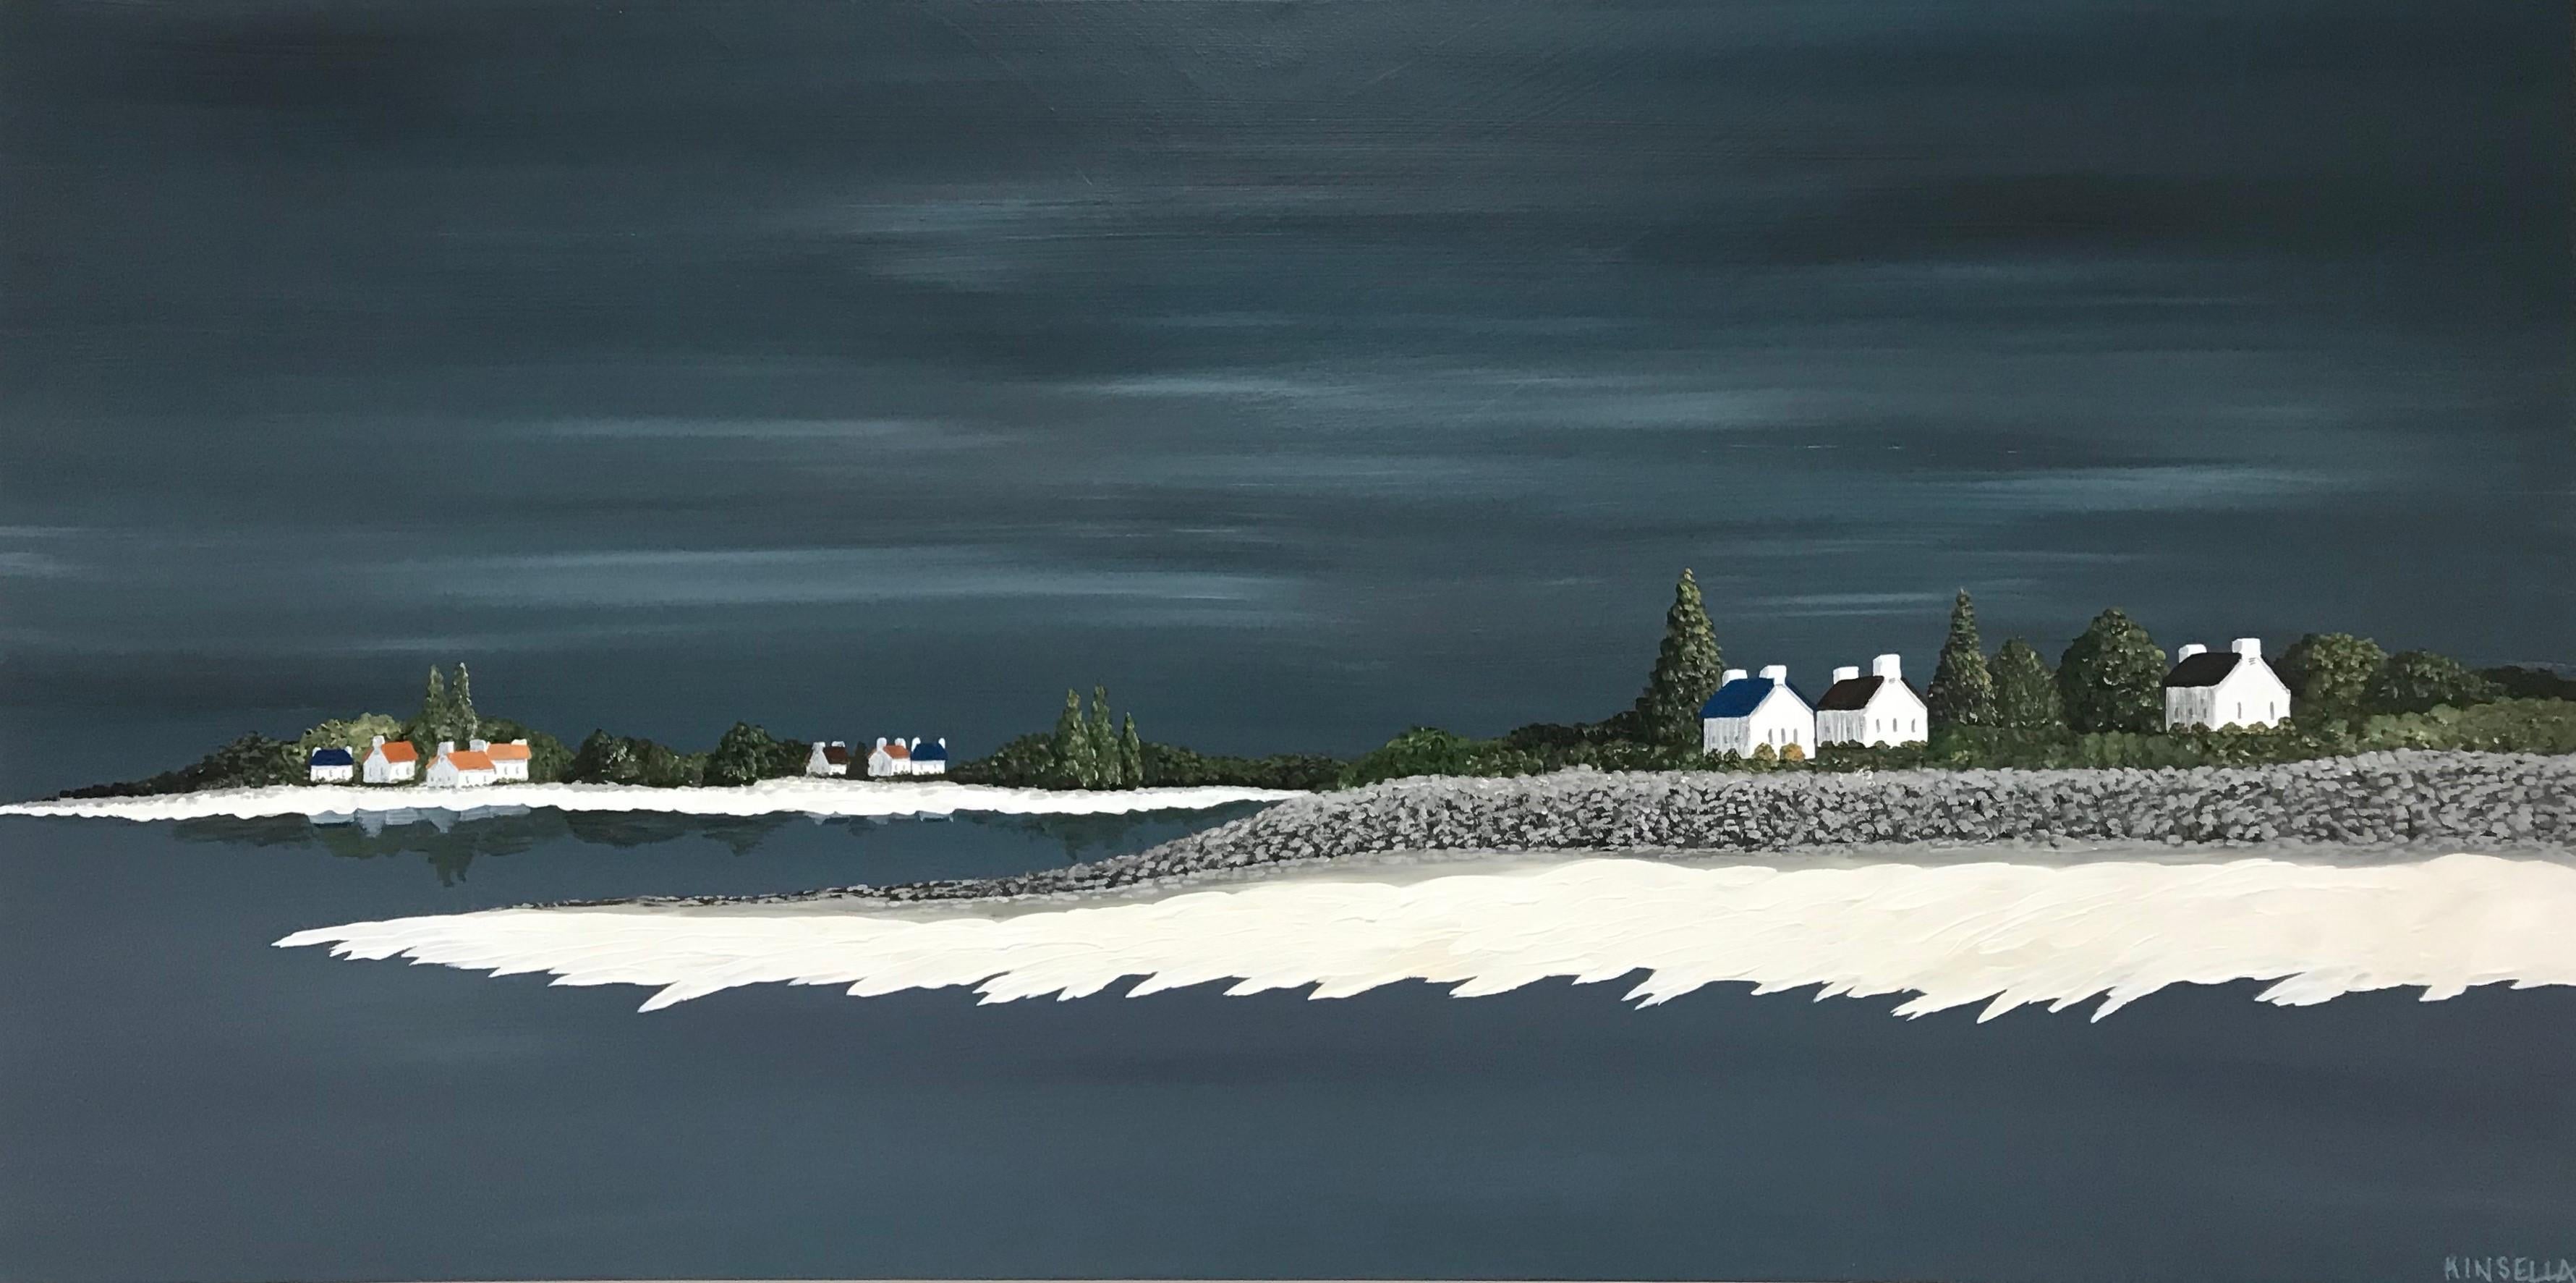 'Bay of Light' is a large horizontal contemporary acrylic on canvas coastal painting created by American artist Susan Kinsella in 2019. Featuring a dark palette made of blue grey, black and green colors beautifully contrasted with light cream tones,